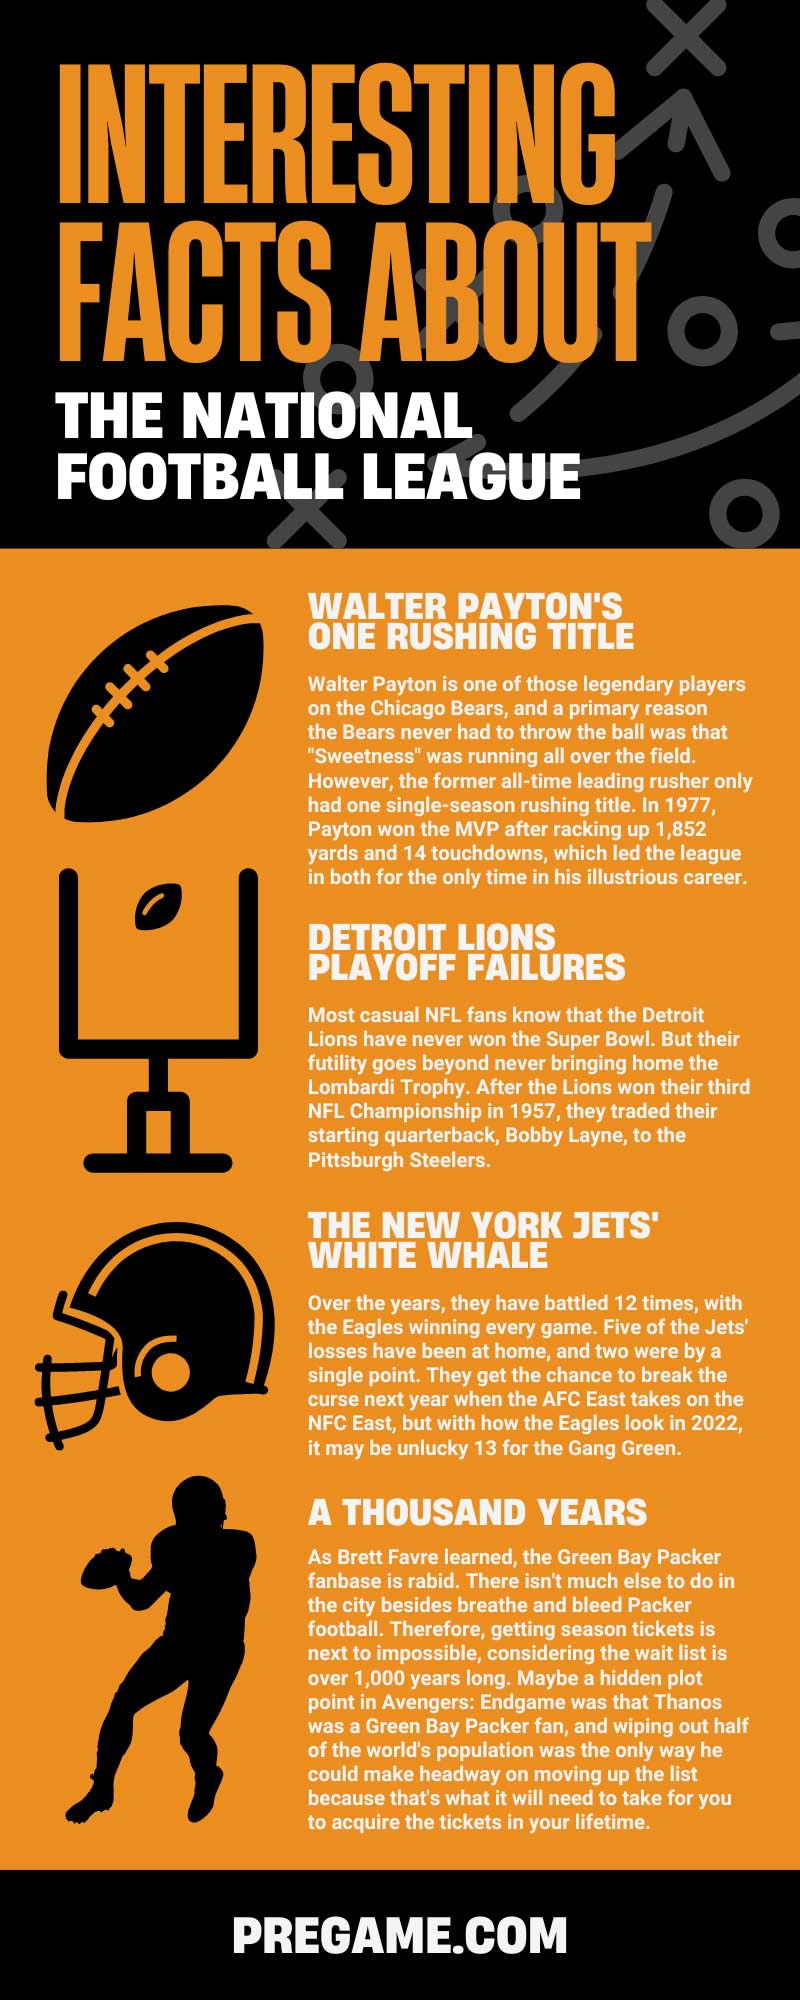 10 Interesting Facts About the National Football League